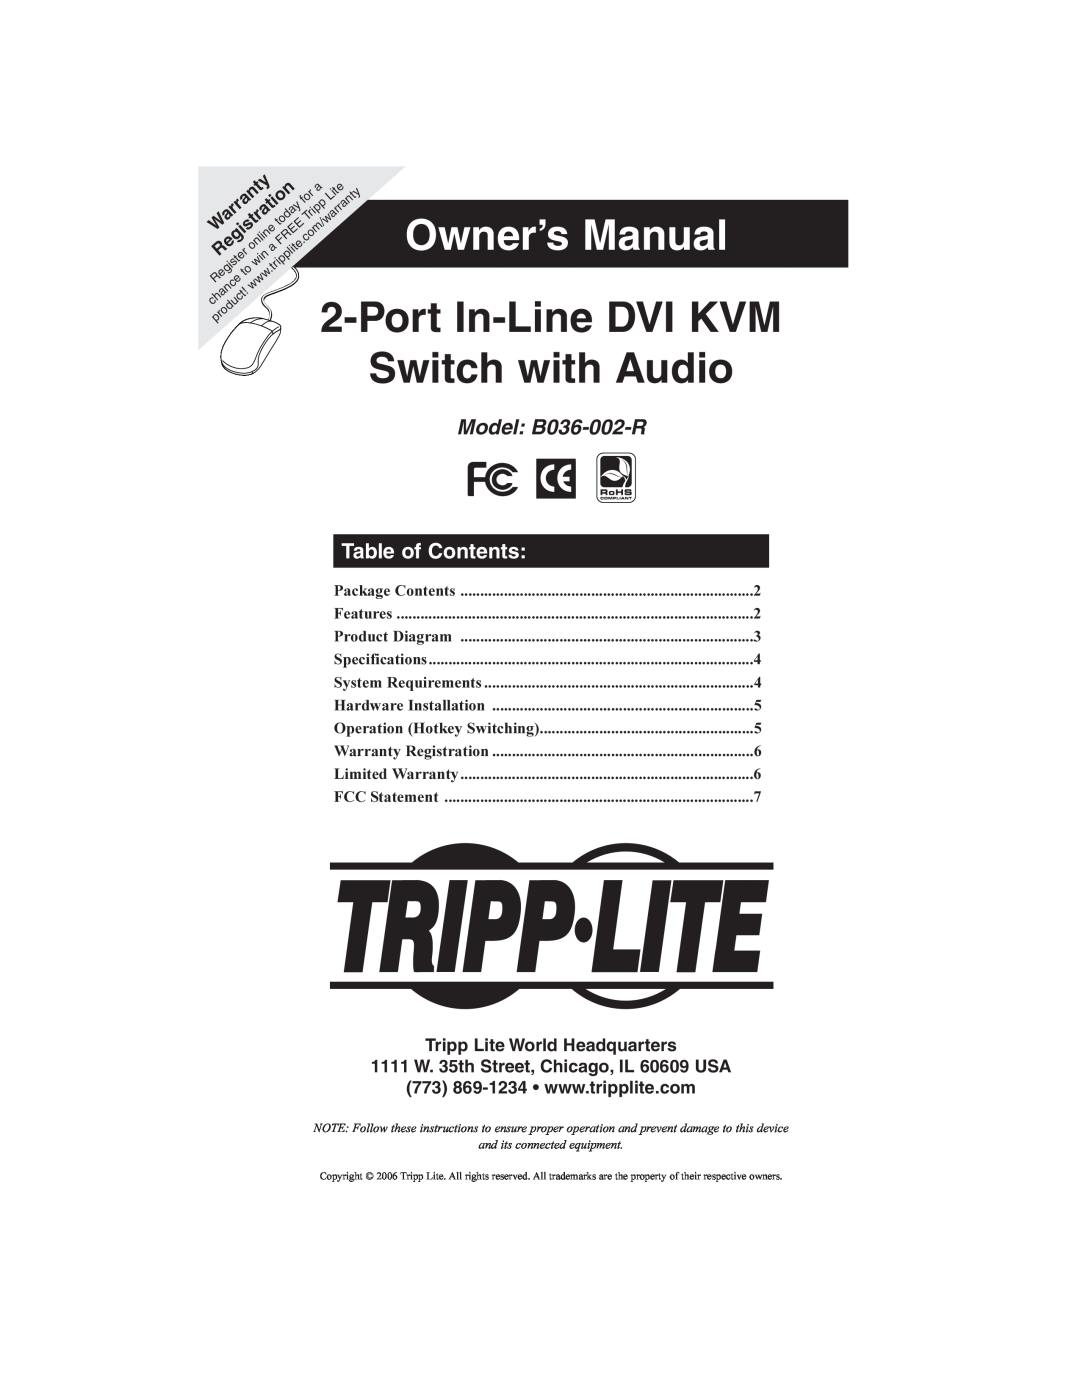 Tripp Lite B036-002-R owner manual Table of Contents, Tripp Lite World Headquarters, Owner’s Manual, Port In-Line DVI KVM 